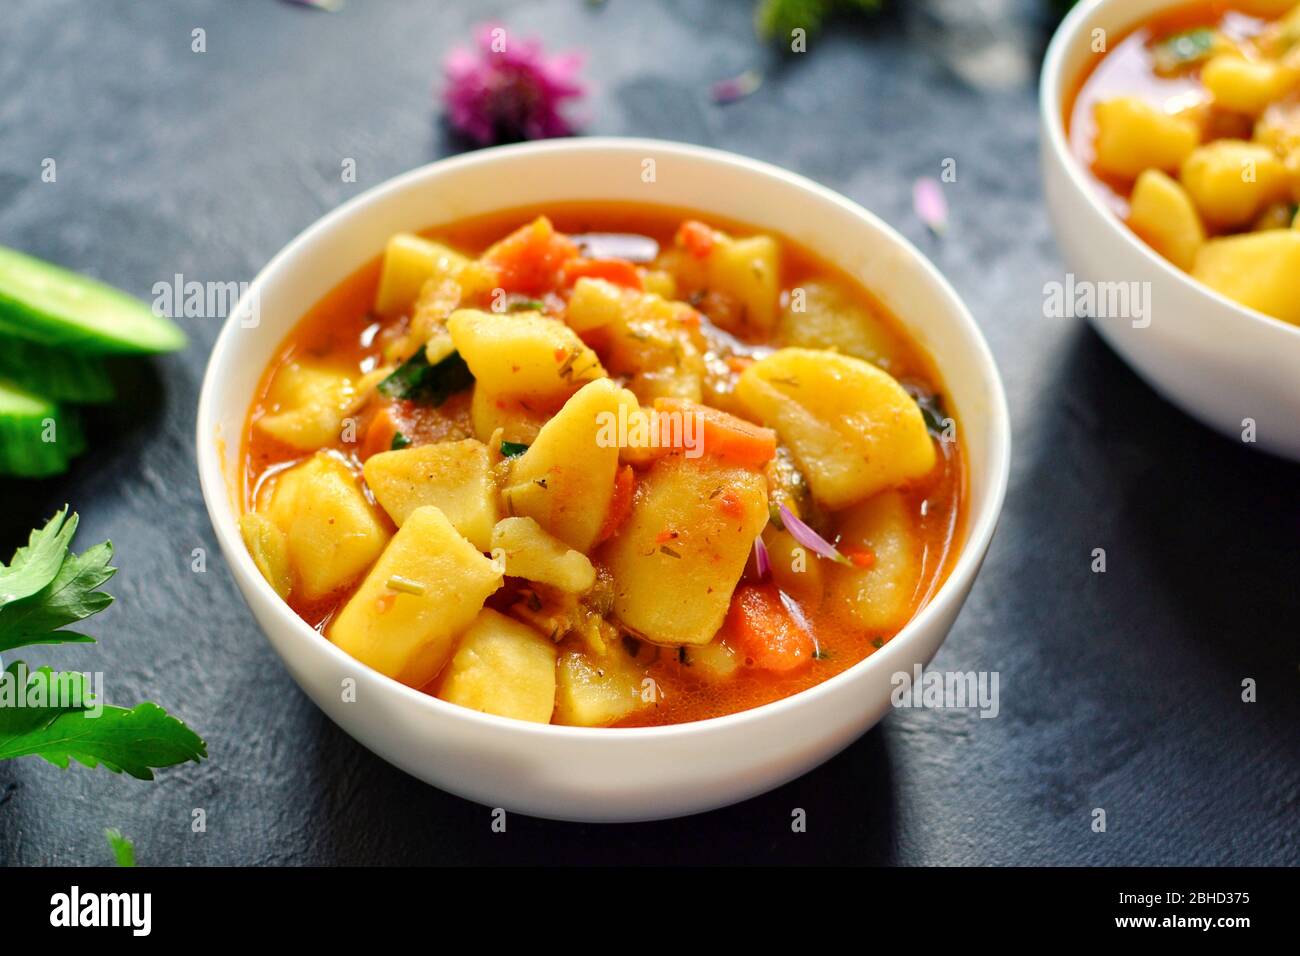 Vegetable stew in a white bowl. Photo food. Stew with potatoes and carrots on a dark concrete background. Healthy vegetarian food. Stock Photo